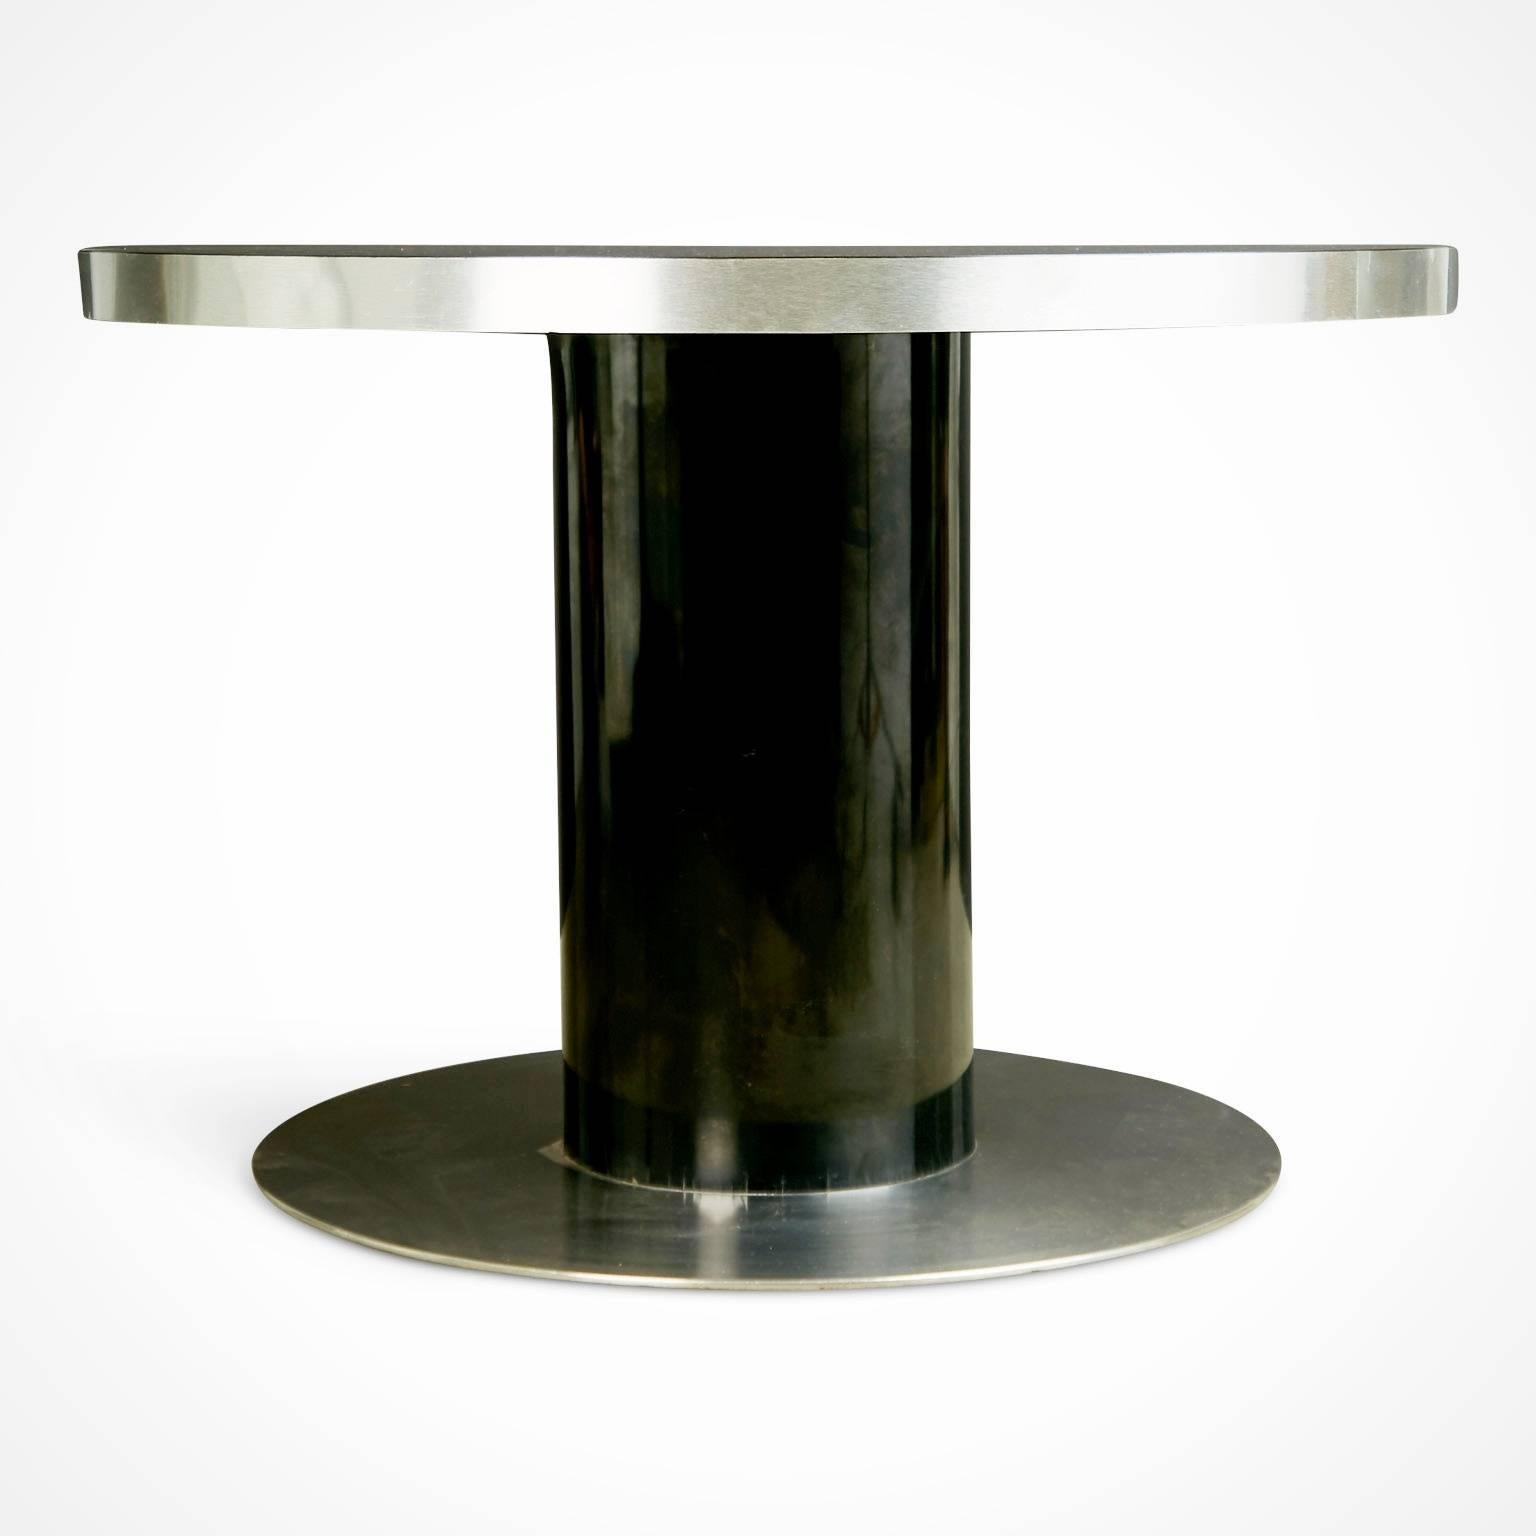 Elegant dinette table comprised of laminate and steel by Italian designer Willy Rizzo. The modern pedestal design consists of a solid laminate top and base consisting of a laminated column and steel foundation. Rizzo was known for deliberately